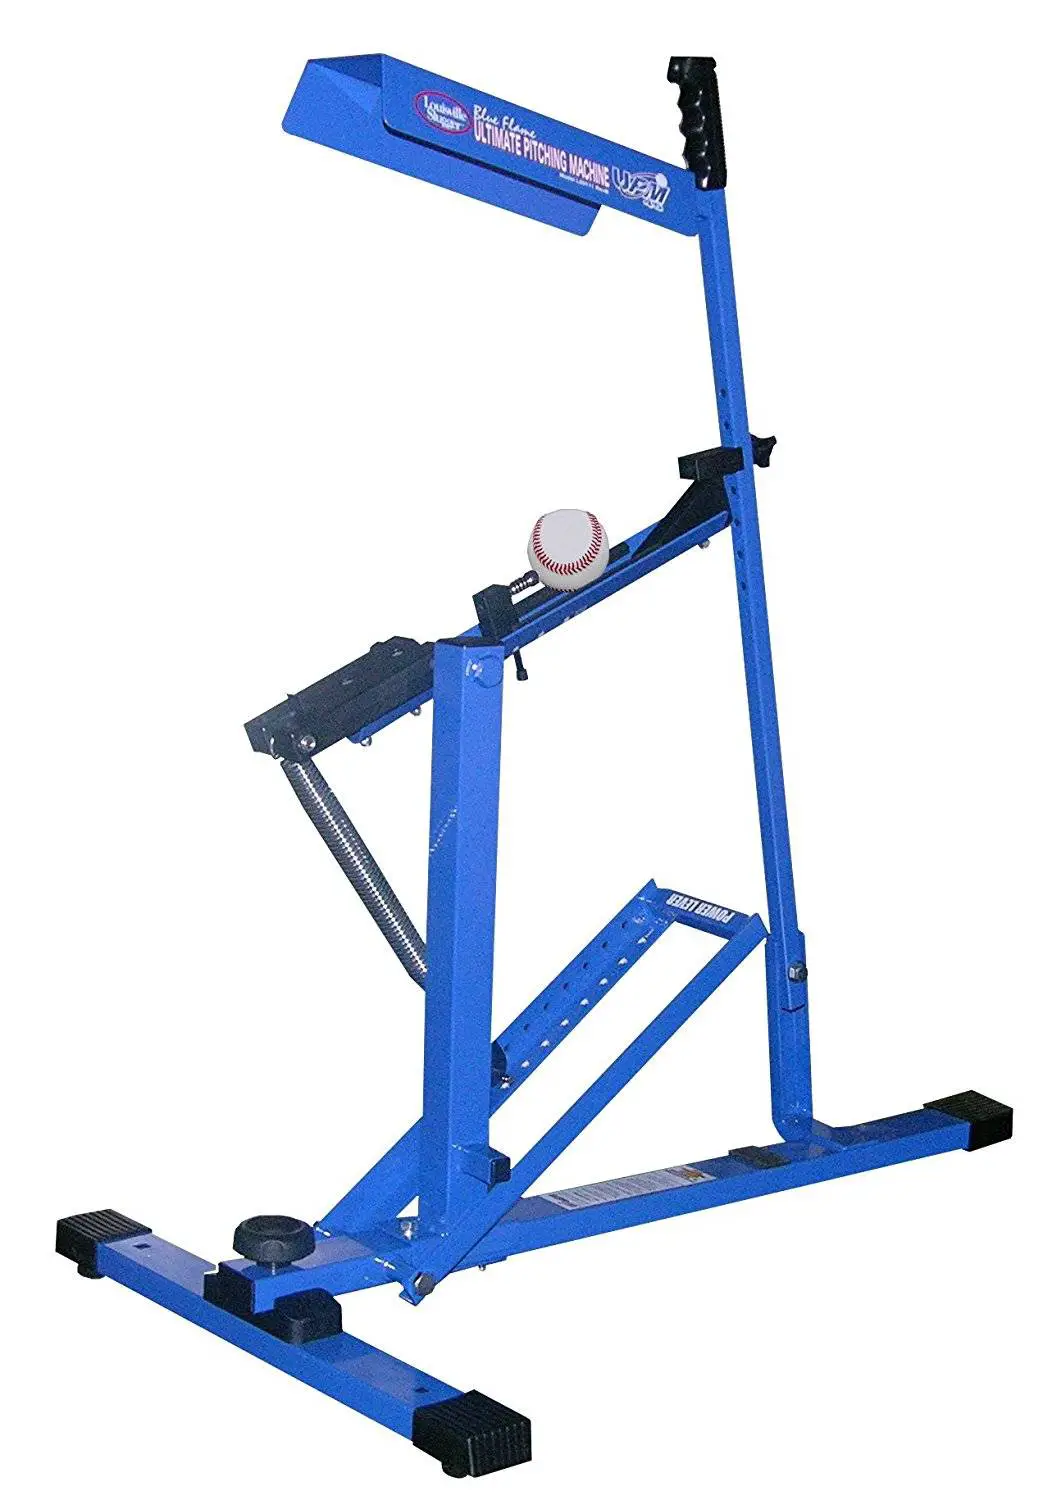 Jugs BP1 Baseball Only Pitching Machine /— Throws Baseballs up to 70 mph from a Realistic delivery Height.